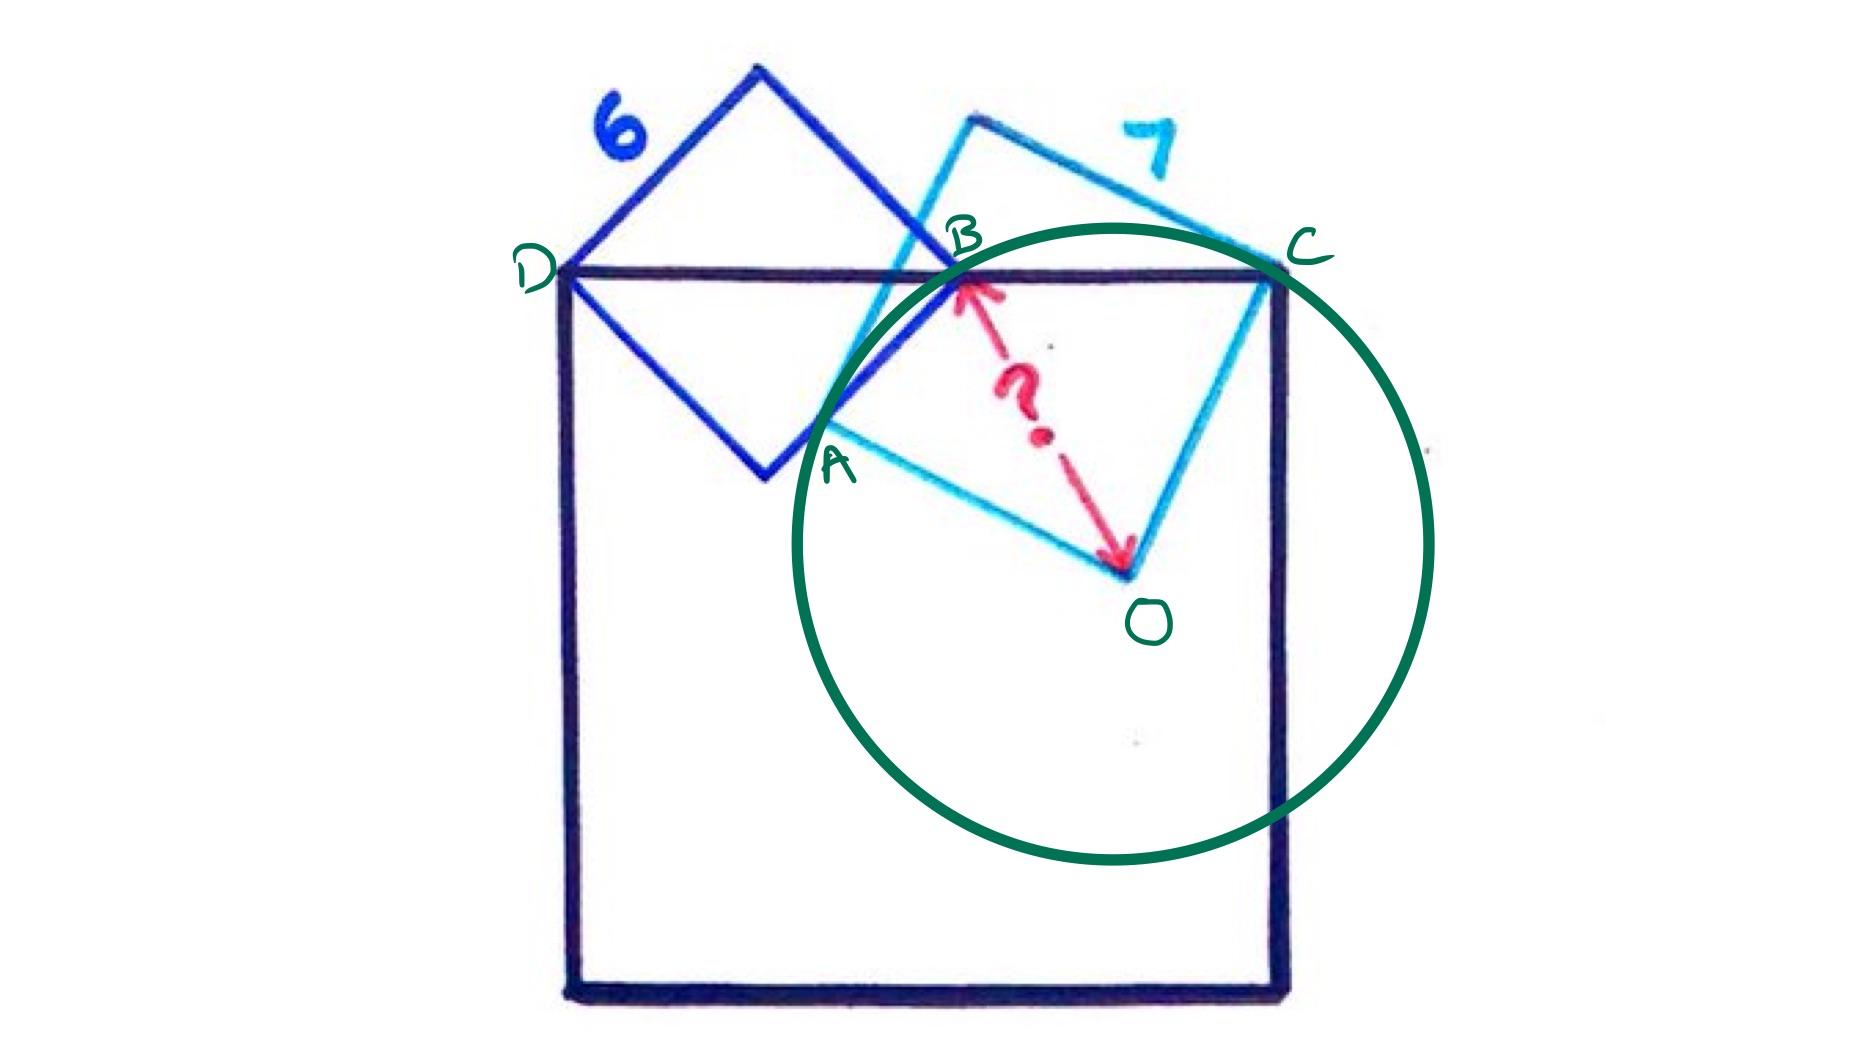 Three overlapping squares labelled